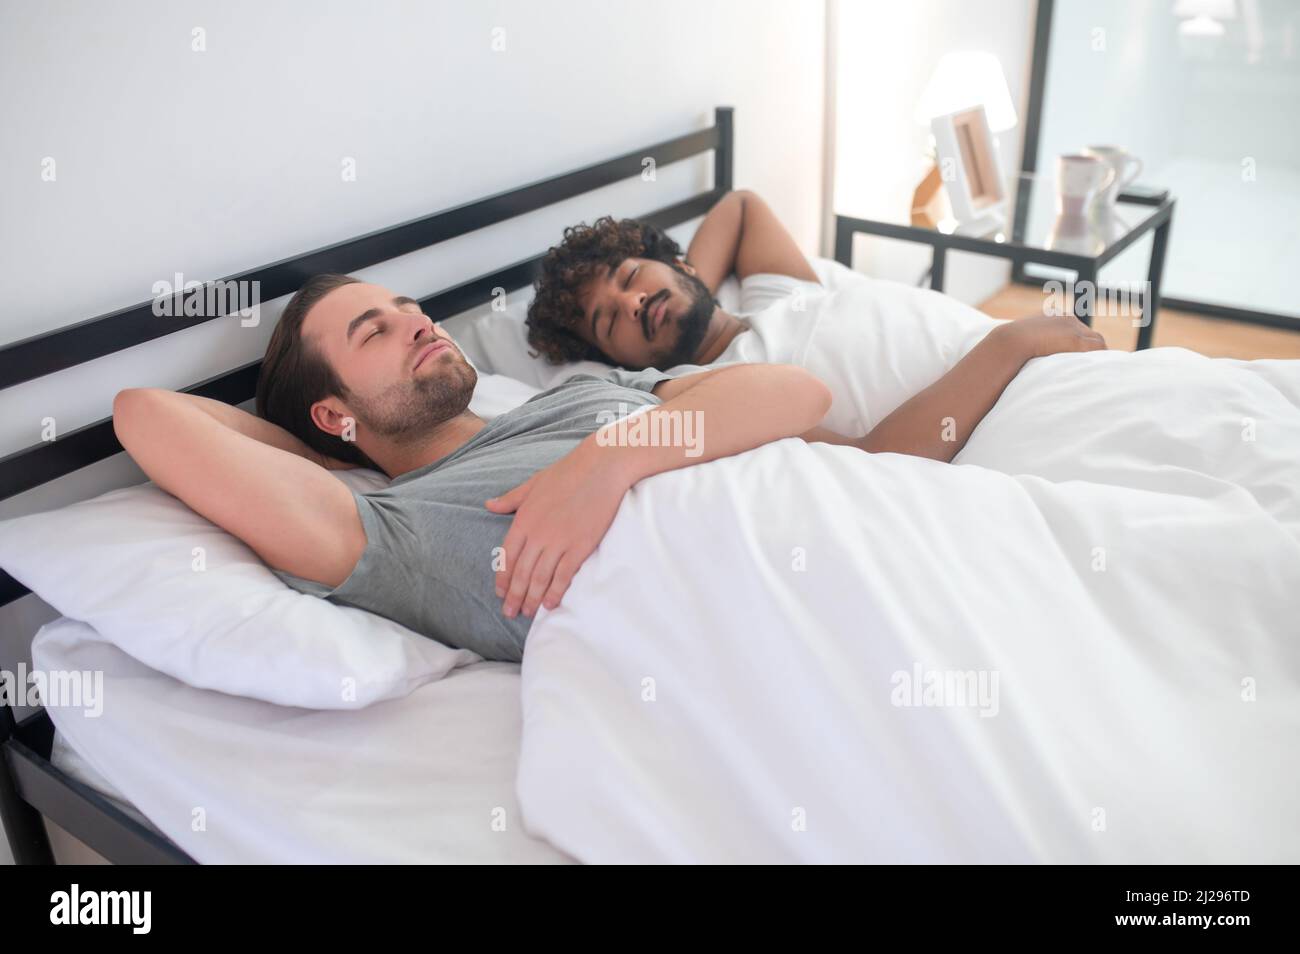 Two gay men napping in their bedroom Stock Photo